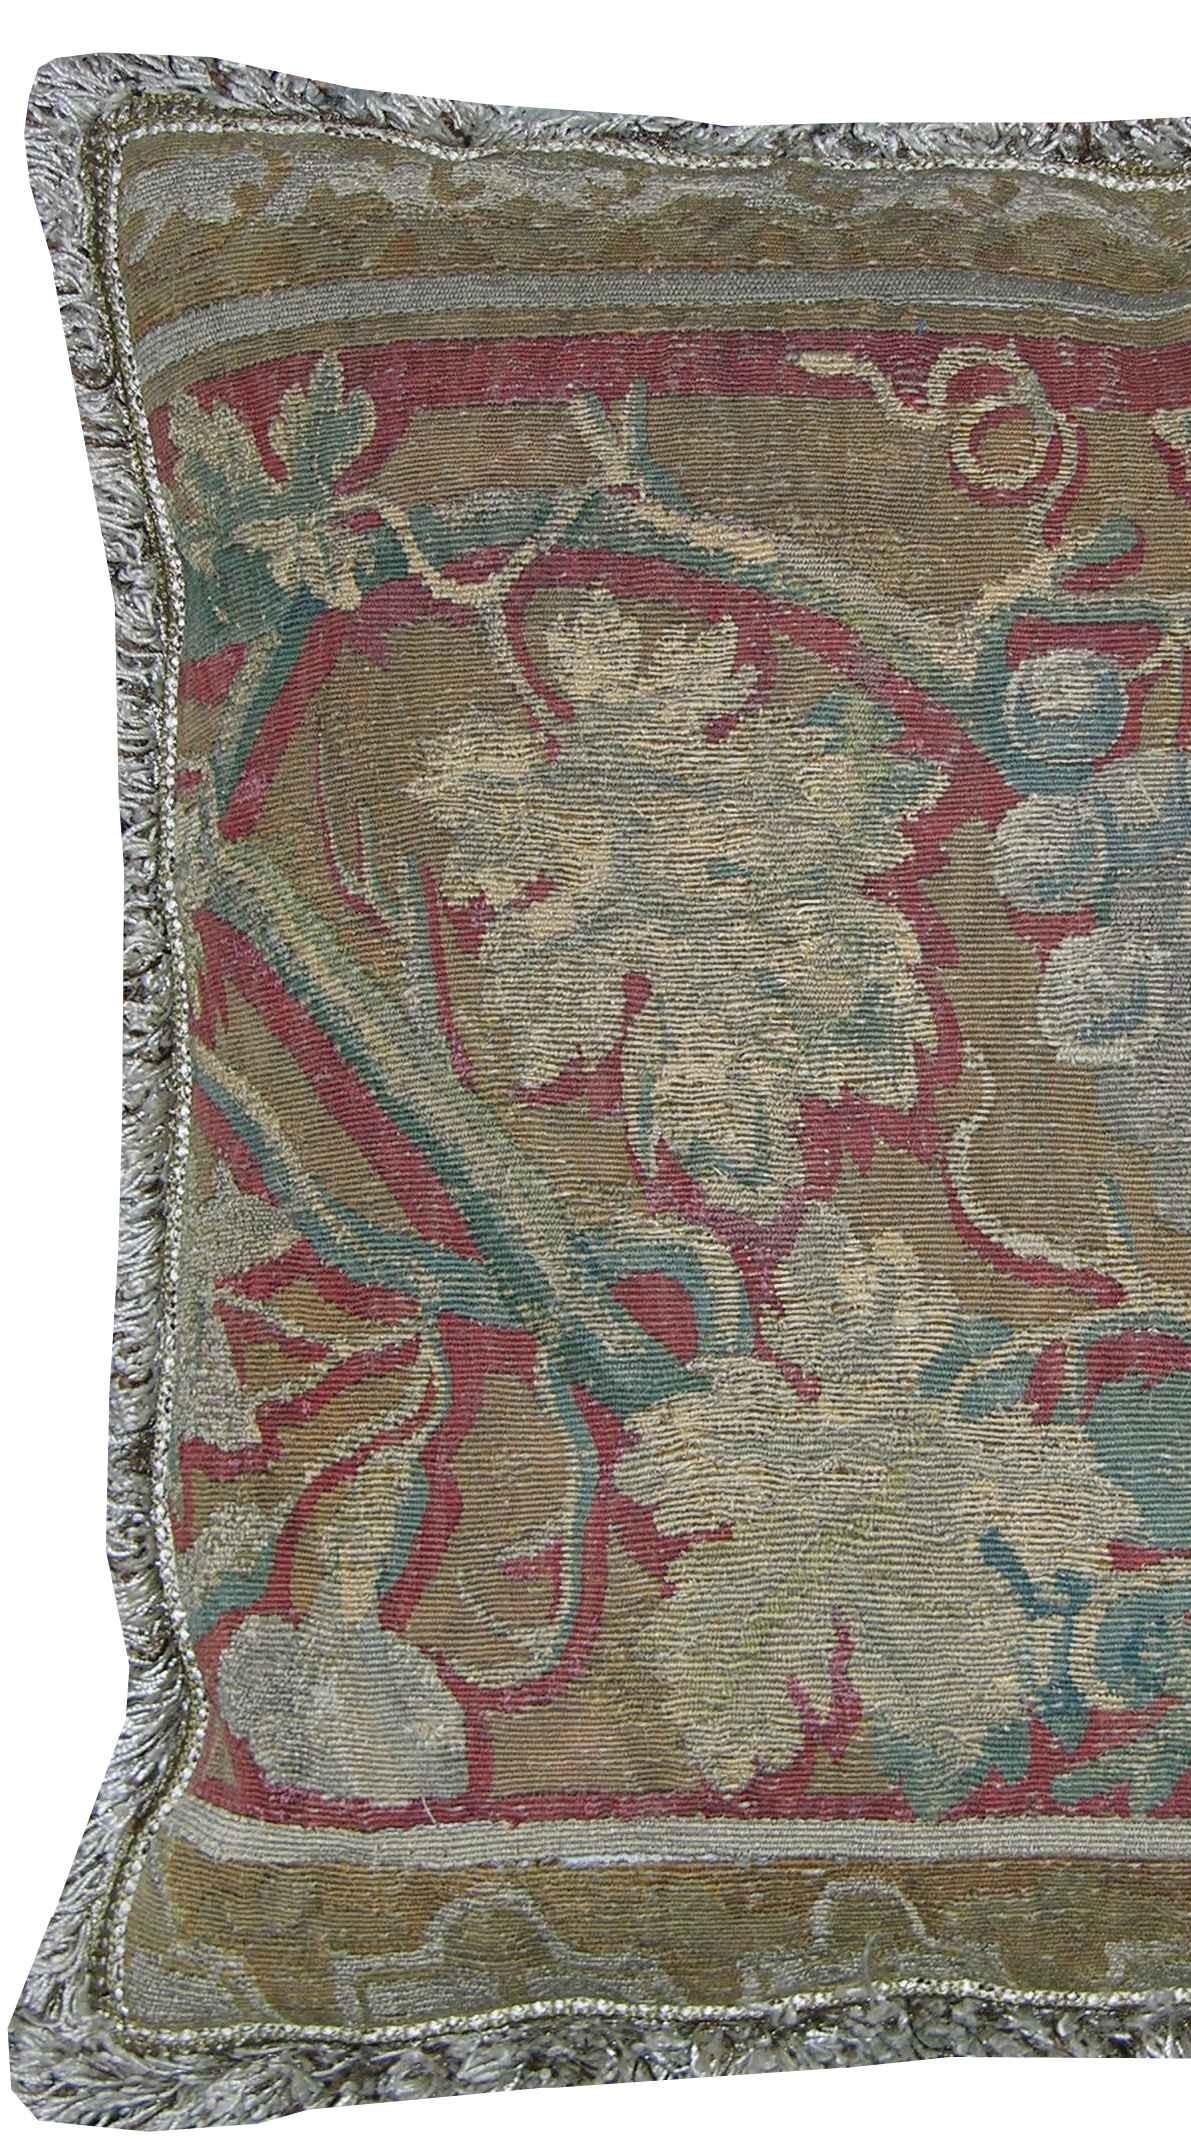 17th Century Antique Brussels Tapestry Pillow
